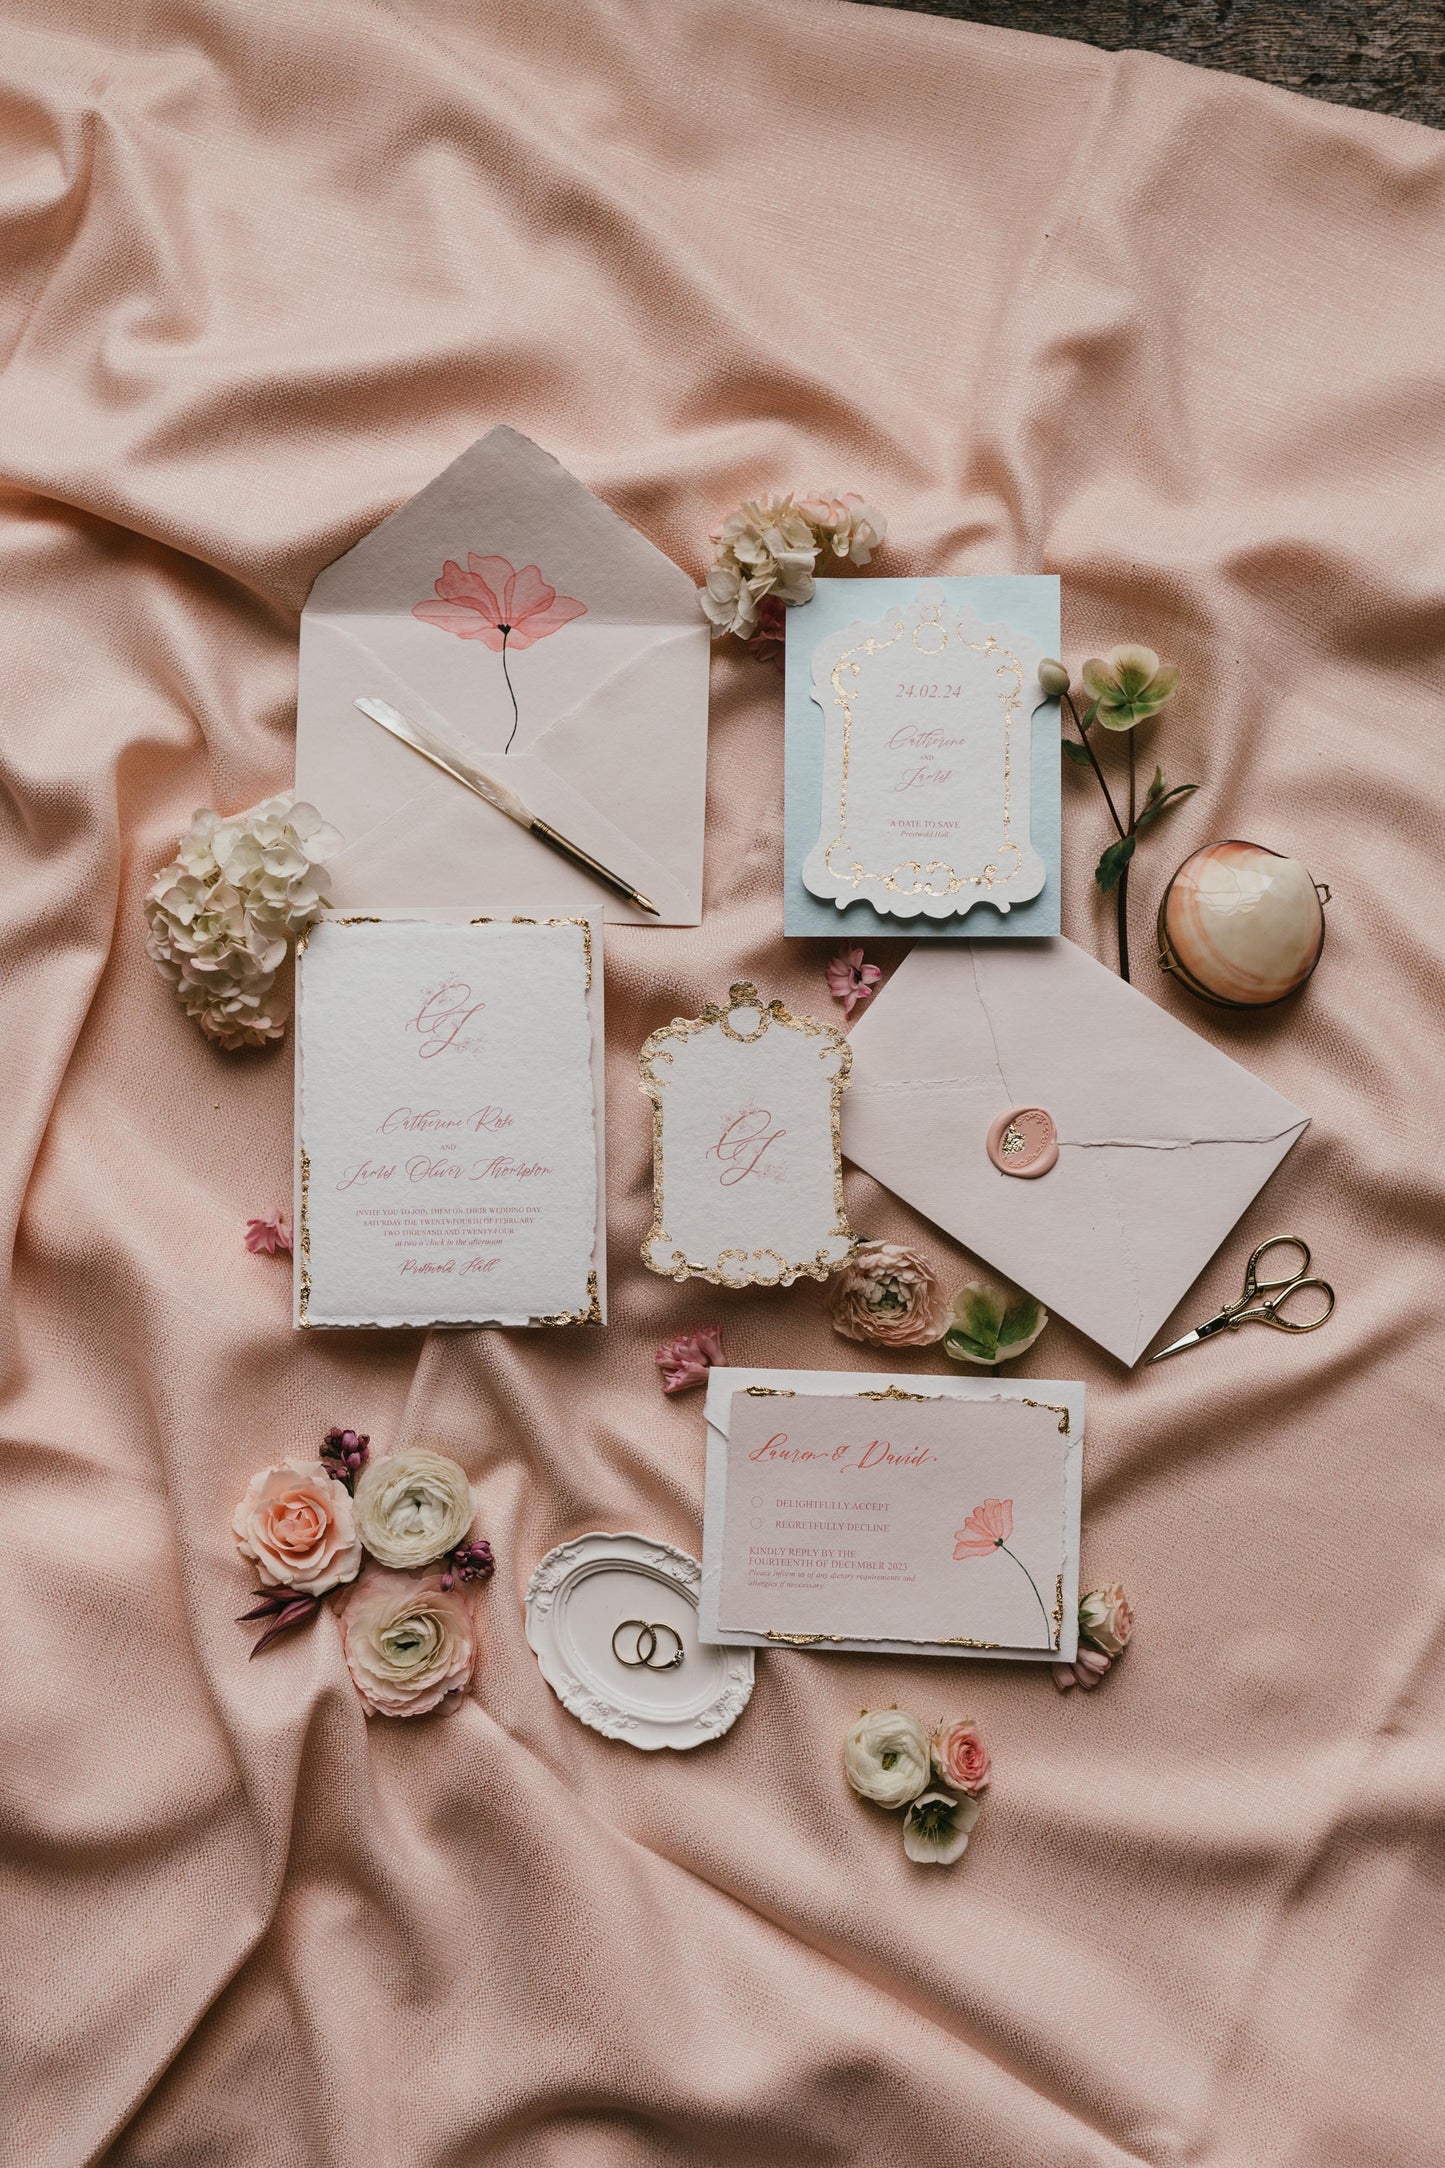 Hand Crafted Wedding Invitation with gilded details